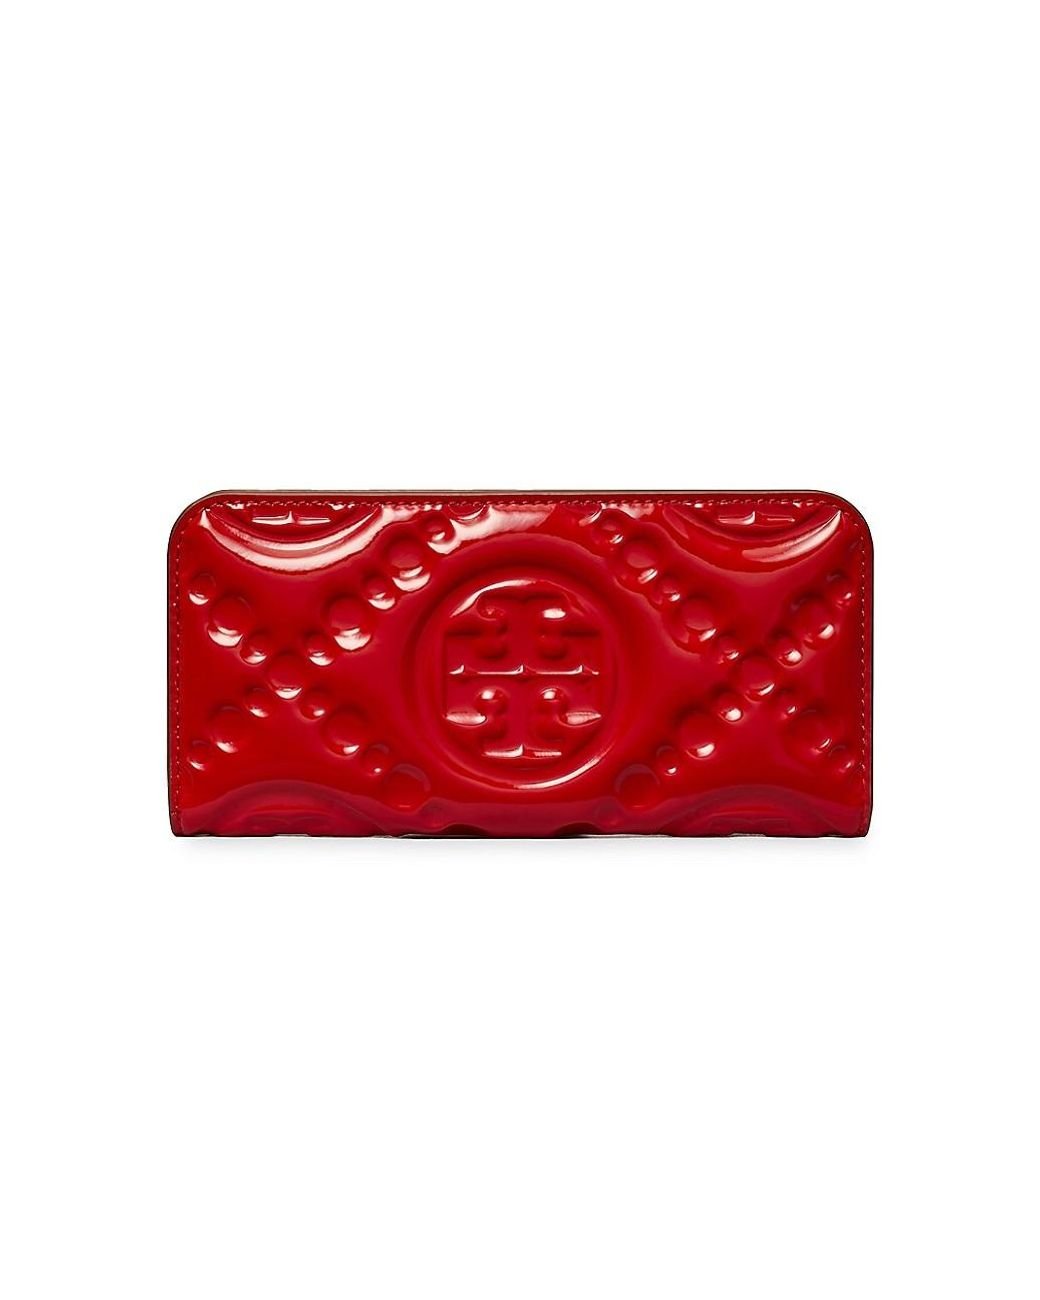 Tory Burch T Monogram Embossed Patent Leather Zip Wallet in Red | Lyst